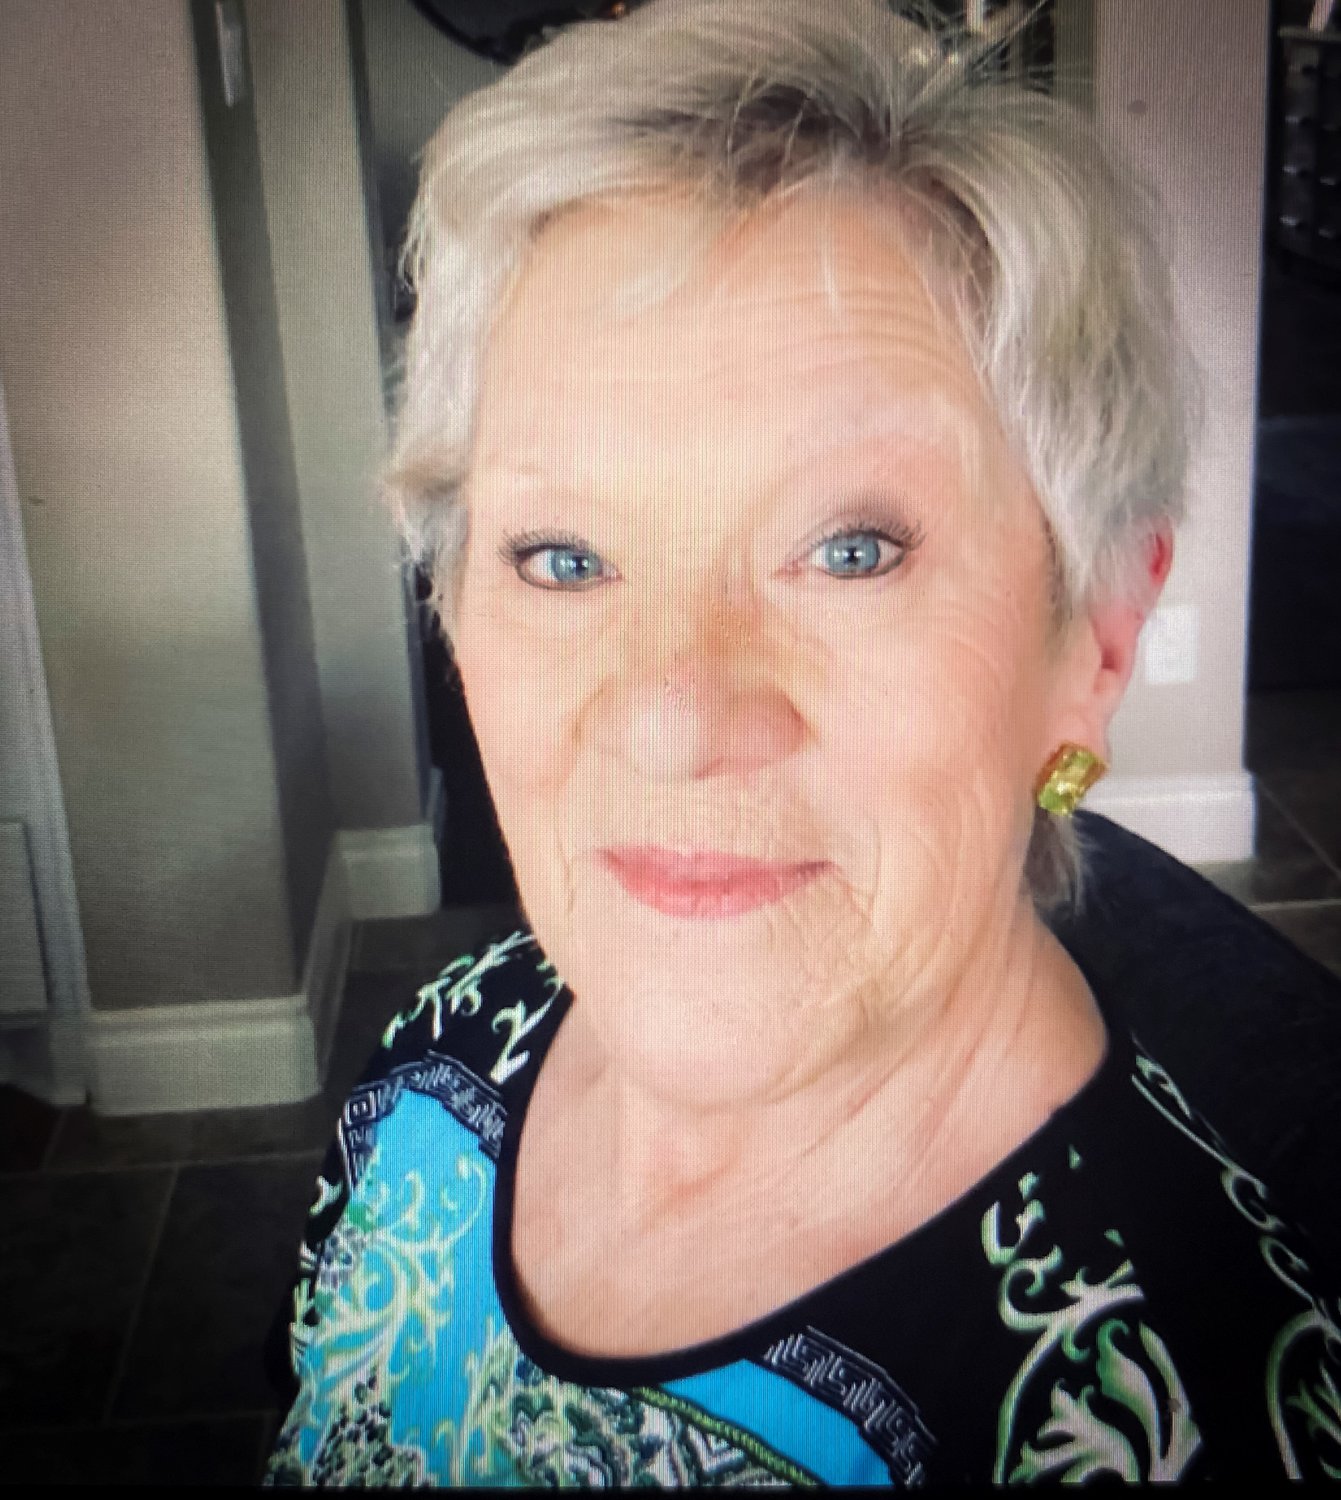 Kathryn Marie Dominey - otherwise known as Sissy Kay - passed away Aug. 21. She was a successful interior designer with a career that spanned five decades. She was also a loving mother and grandmother with a large family who misses her deeply.